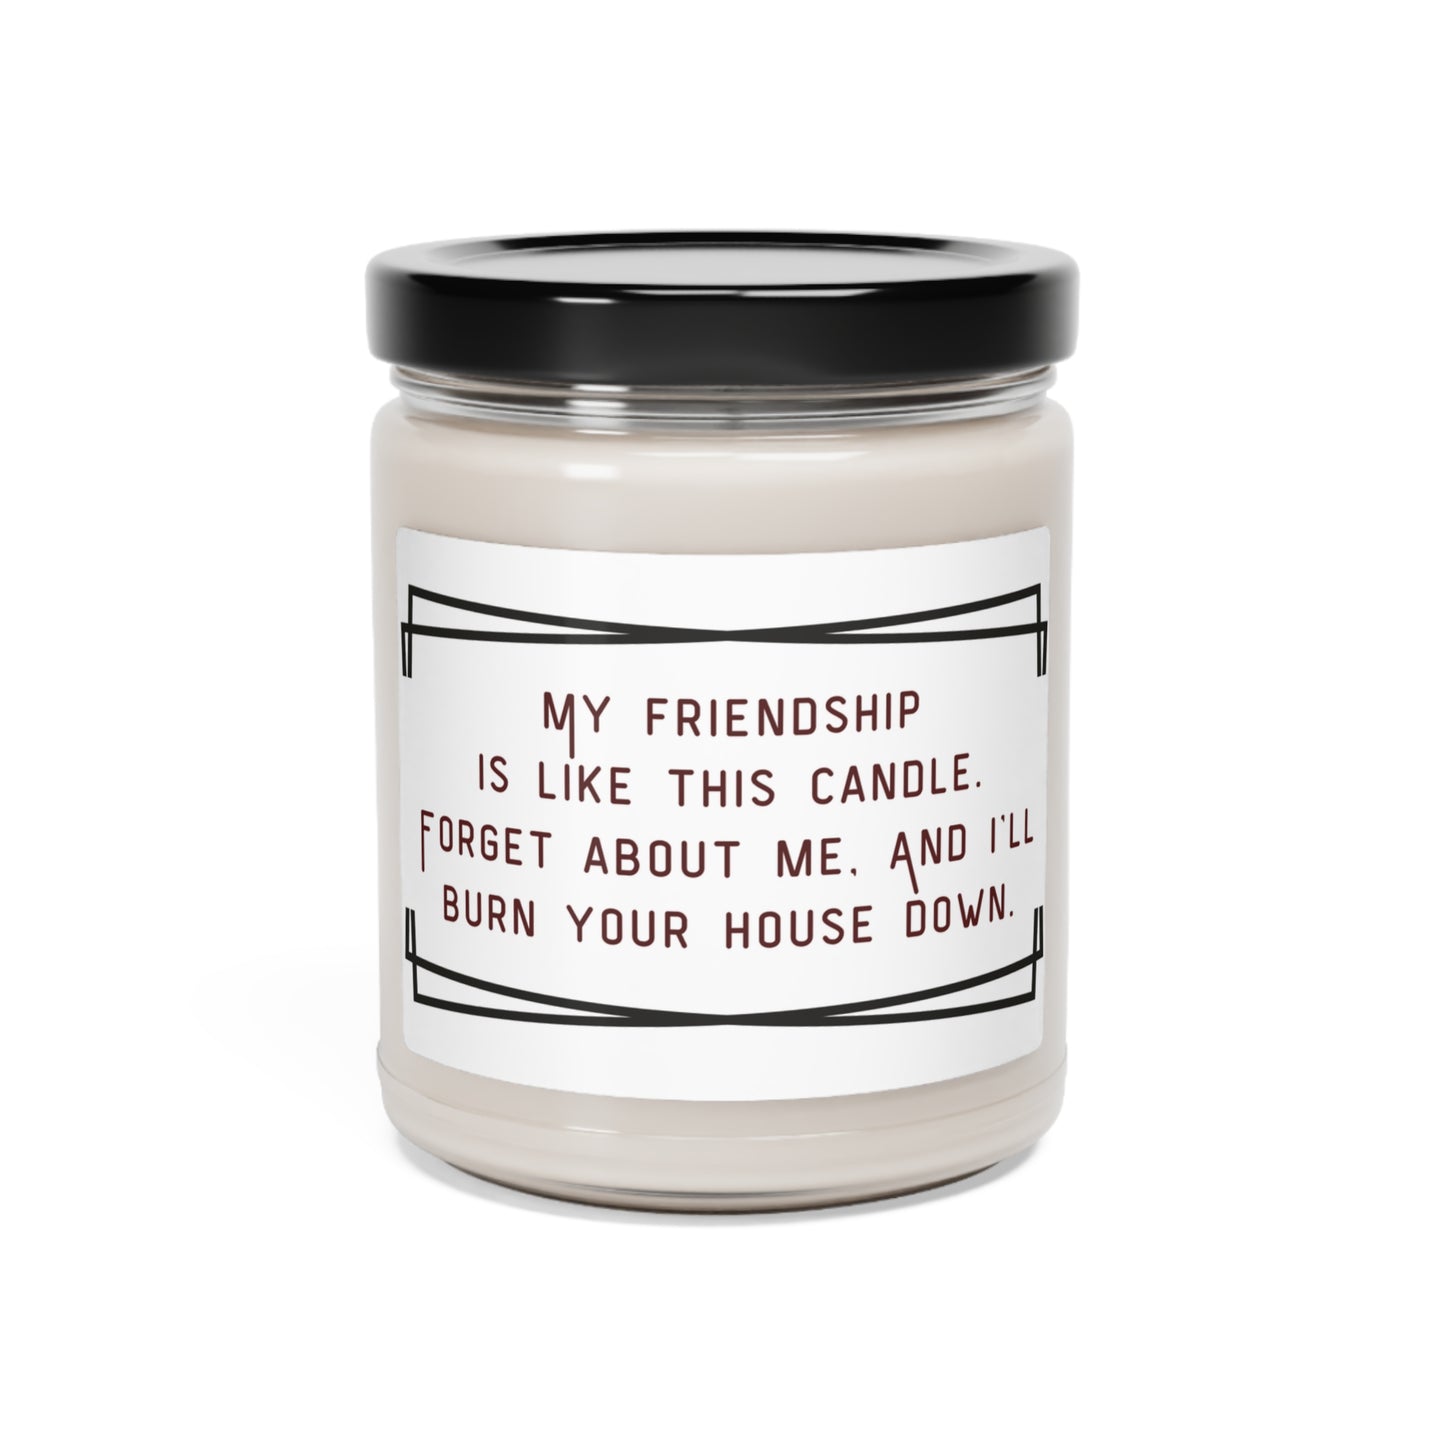 Scented Soy Candle, 9oz.  My friendship is like this candle, forget about me and I will burn the house down